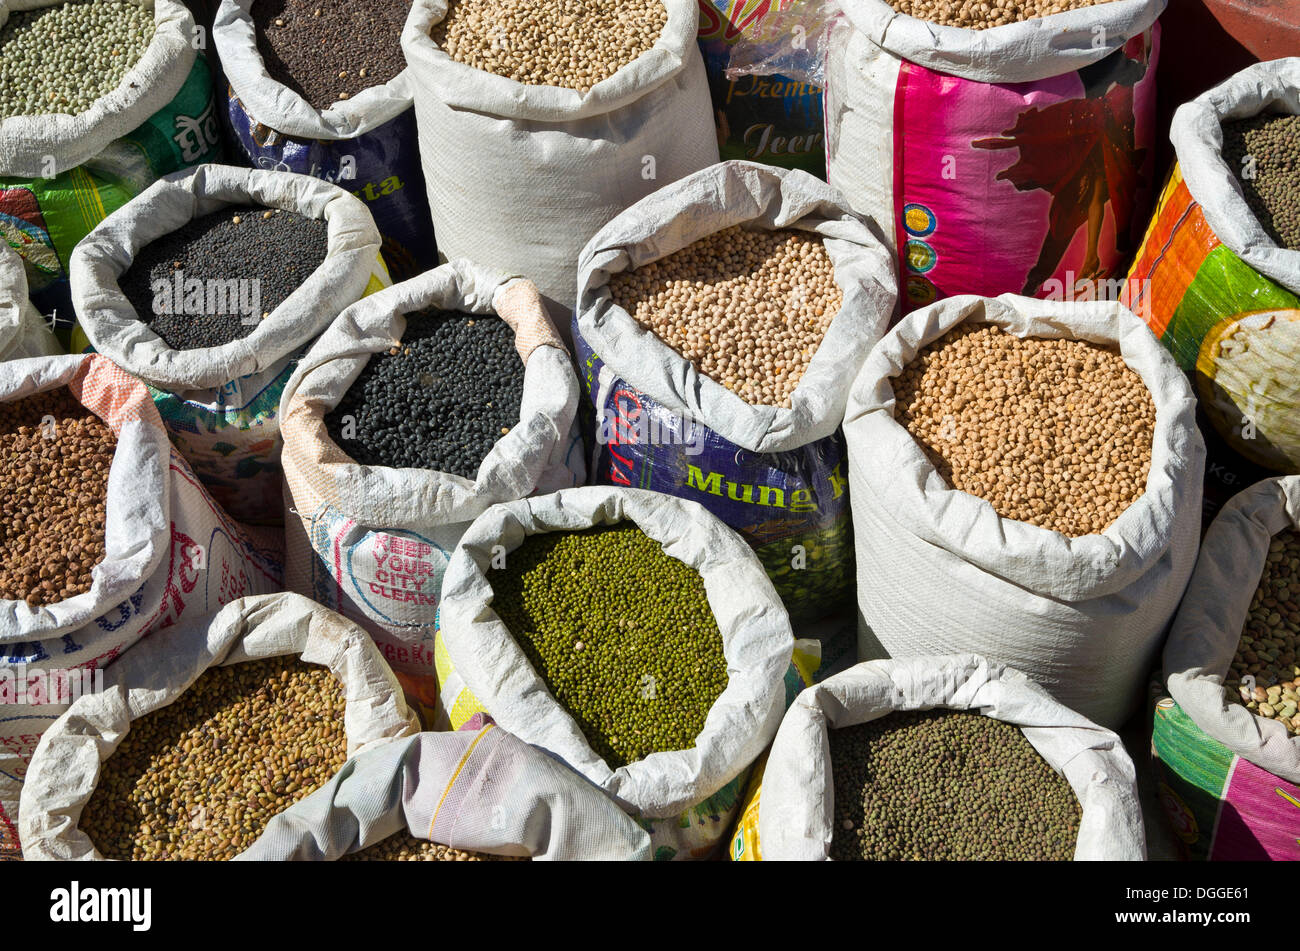 Many different types of dried pulses, dhal, in bags, displayed for sale, Kathmandu, Kathmandu District, Bagmati Zone, Nepal Stock Photo